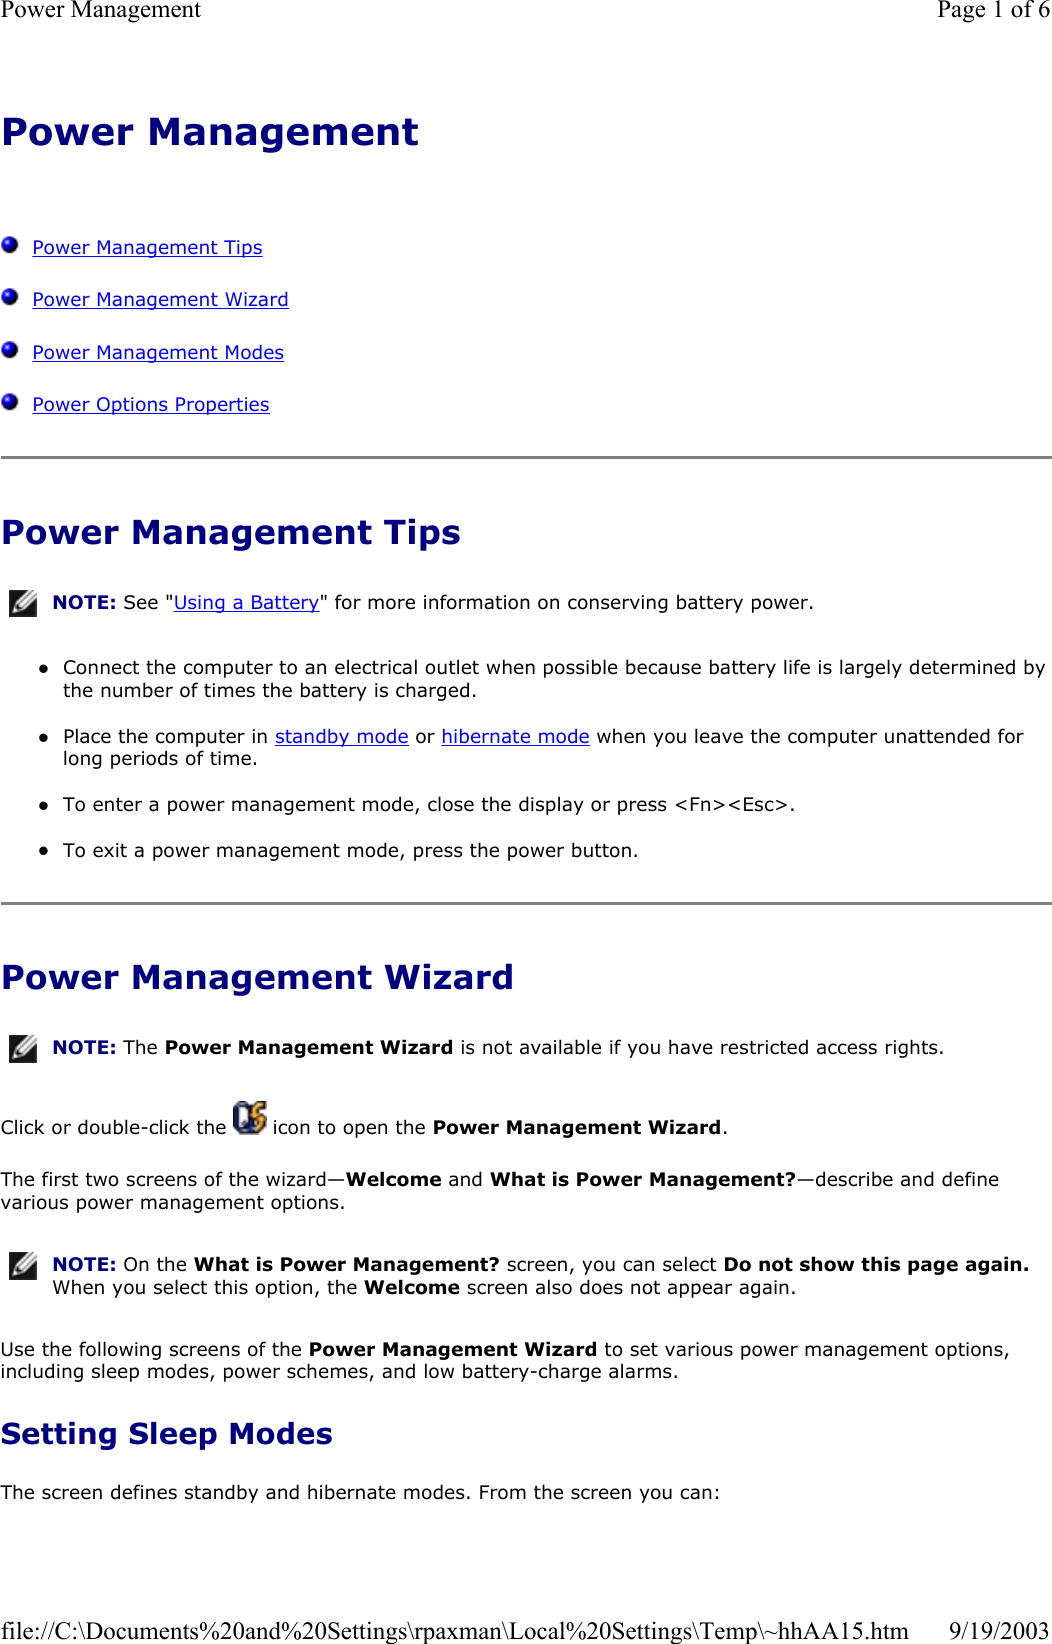 Power Management      Power Management Tips   Power Management Wizard   Power Management Modes   Power Options Properties Power Management Tips zConnect the computer to an electrical outlet when possible because battery life is largely determined by the number of times the battery is charged.  zPlace the computer in standby mode or hibernate mode when you leave the computer unattended for long periods of time.  zTo enter a power management mode, close the display or press &lt;Fn&gt;&lt;Esc&gt;.  zTo exit a power management mode, press the power button.  Power Management Wizard Click or double-click the   icon to open the Power Management Wizard. The first two screens of the wizard—Welcome and What is Power Management?—describe and define various power management options. Use the following screens of the Power Management Wizard to set various power management options, including sleep modes, power schemes, and low battery-charge alarms. Setting Sleep Modes The screen defines standby and hibernate modes. From the screen you can: NOTE: See &quot;Using a Battery&quot; for more information on conserving battery power.NOTE: The Power Management Wizard is not available if you have restricted access rights.NOTE: On the What is Power Management? screen, you can select Do not show this page again. When you select this option, the Welcome screen also does not appear again.Page 1 of 6Power Management9/19/2003file://C:\Documents%20and%20Settings\rpaxman\Local%20Settings\Temp\~hhAA15.htm